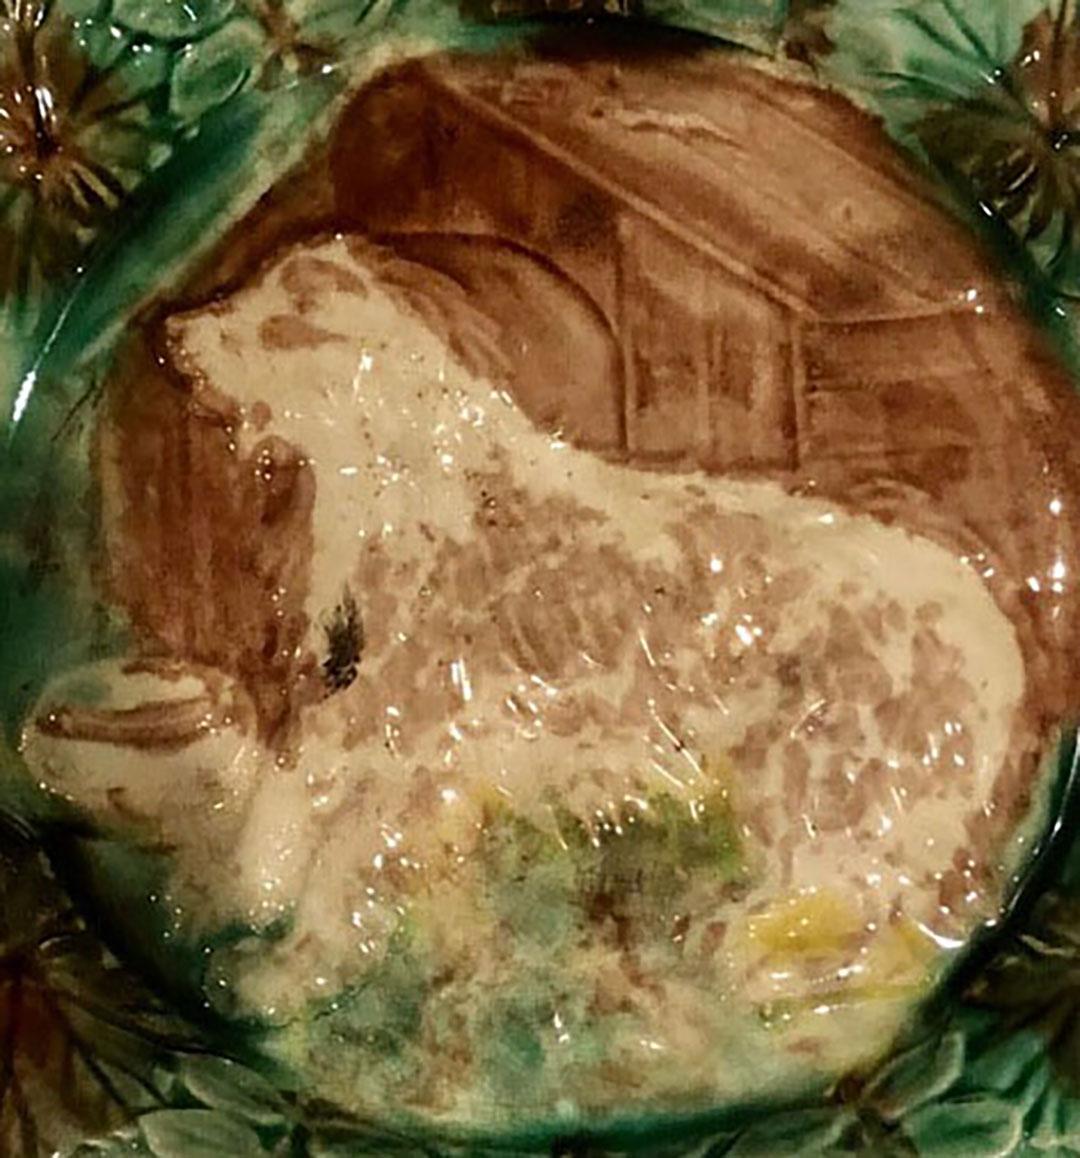 A rare majolica plate depicting a dog in a doghouse with a scalloped edge. Turn of the century maybe 1890s.